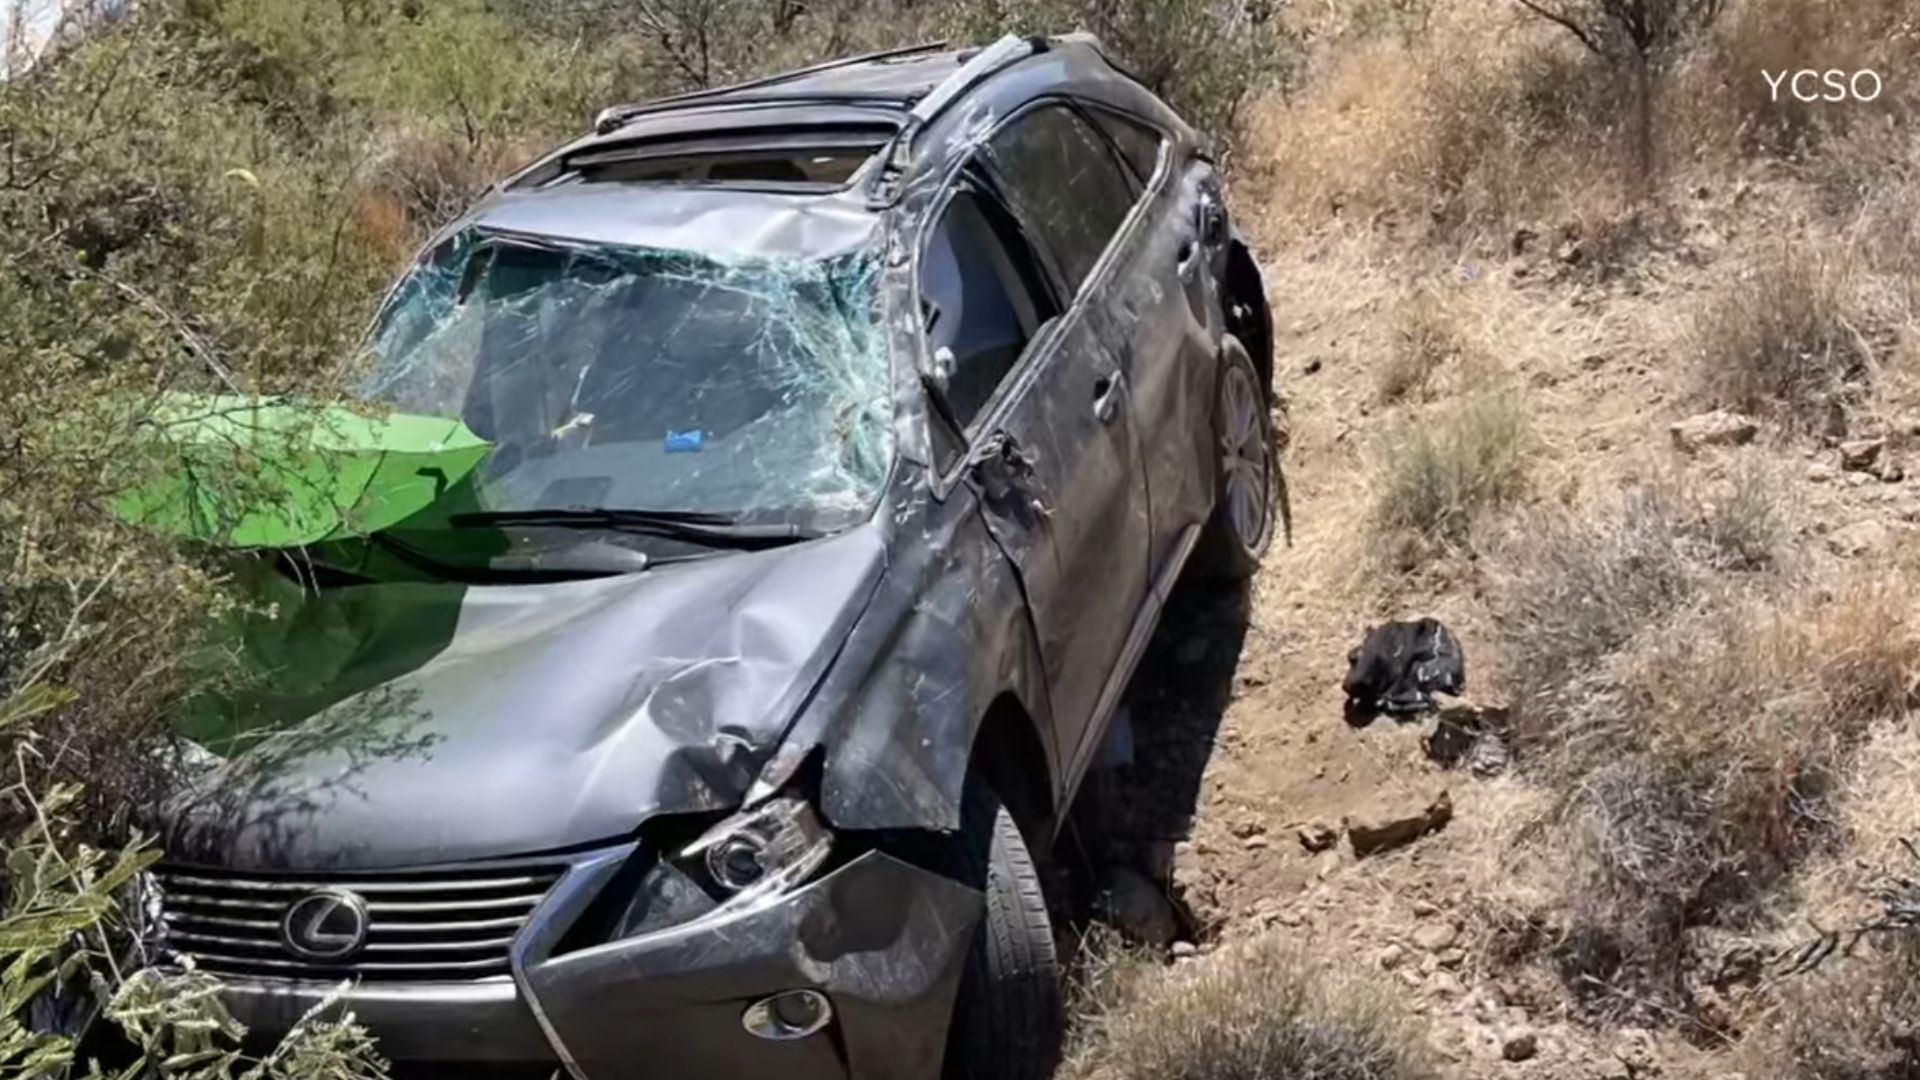 Arizona Woman Survives Car Crash, Being Trapped For Almost Two Days